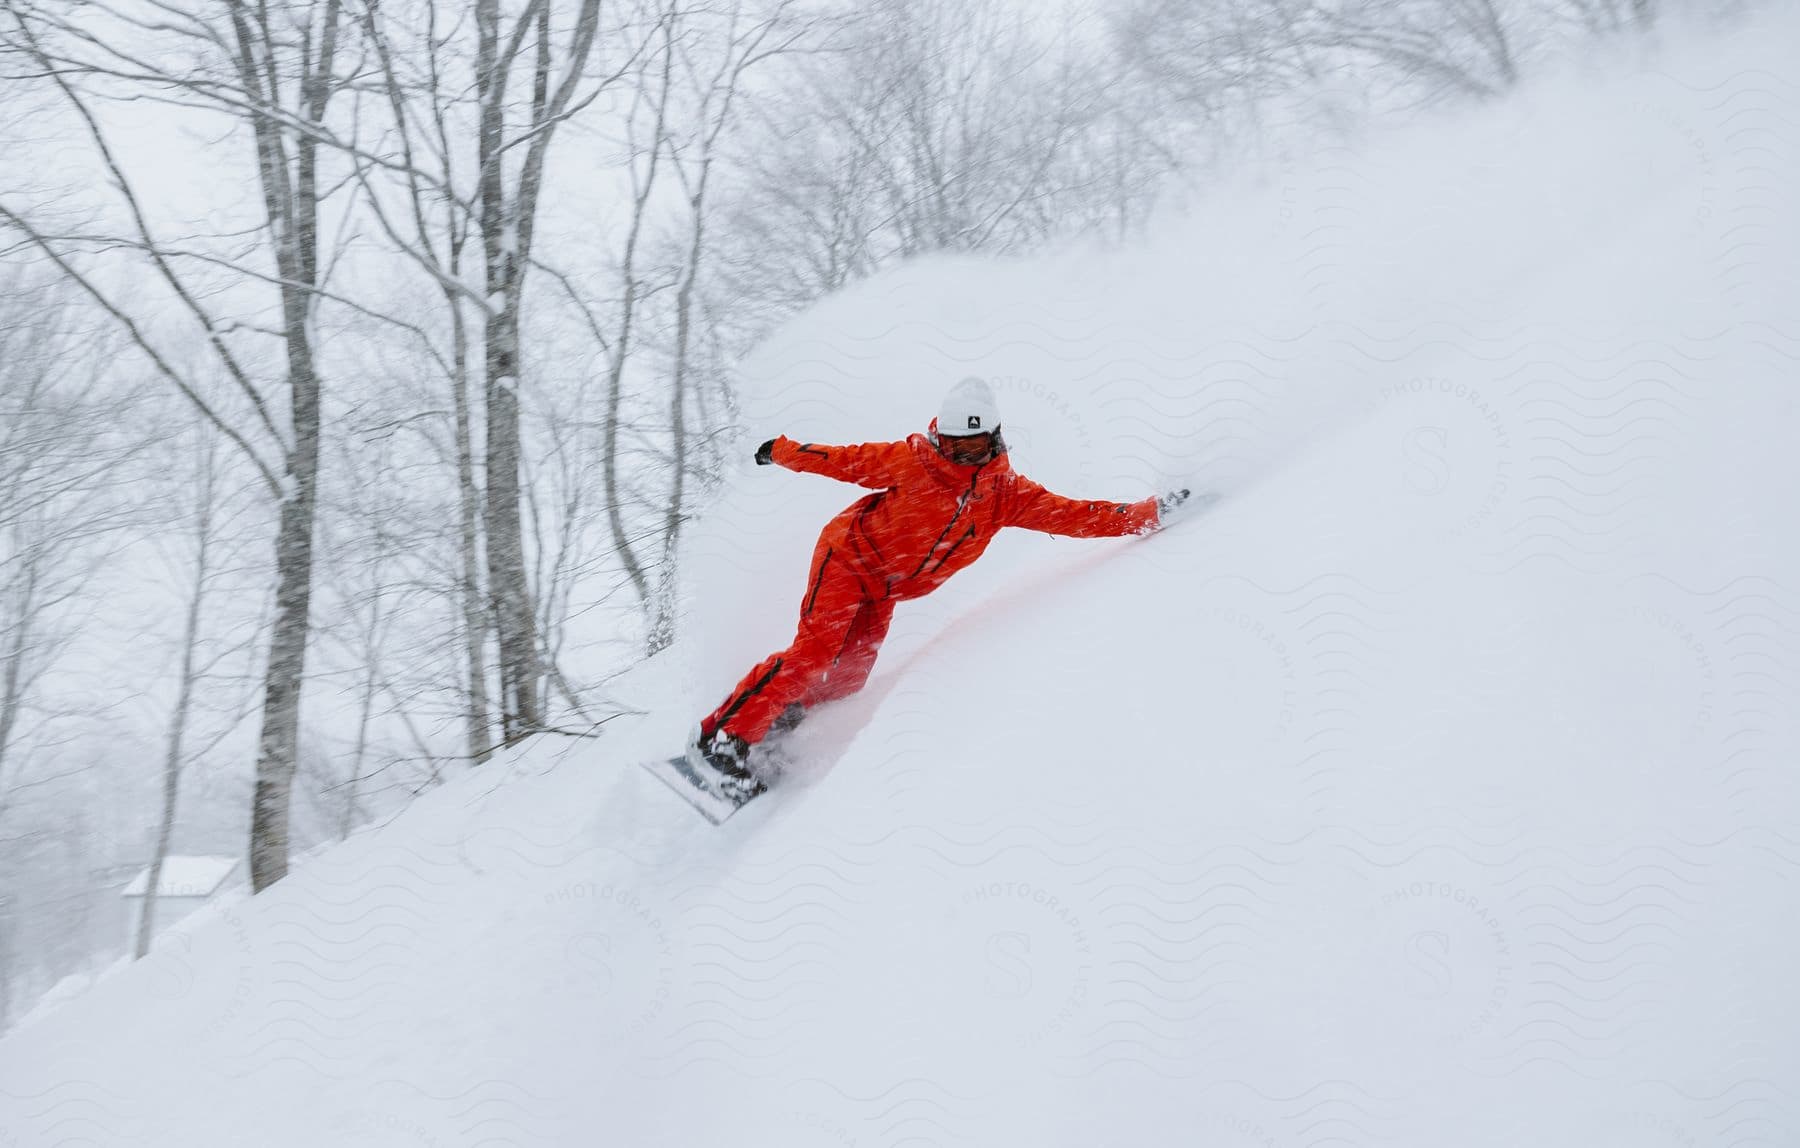 A person snowboarding on a snowy slope during winter